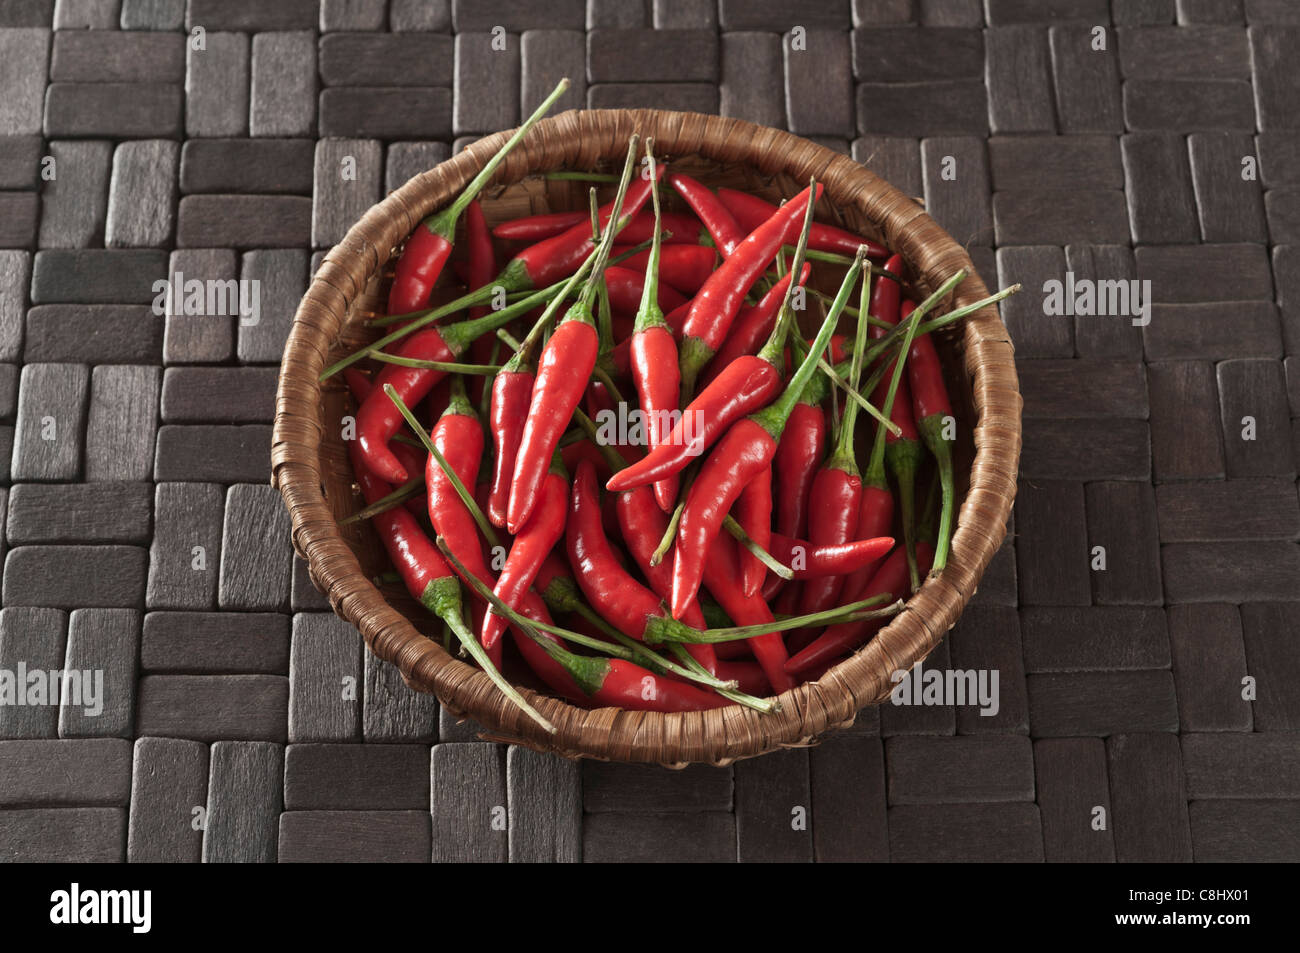 Red chillies on black wooden tiles Stock Photo